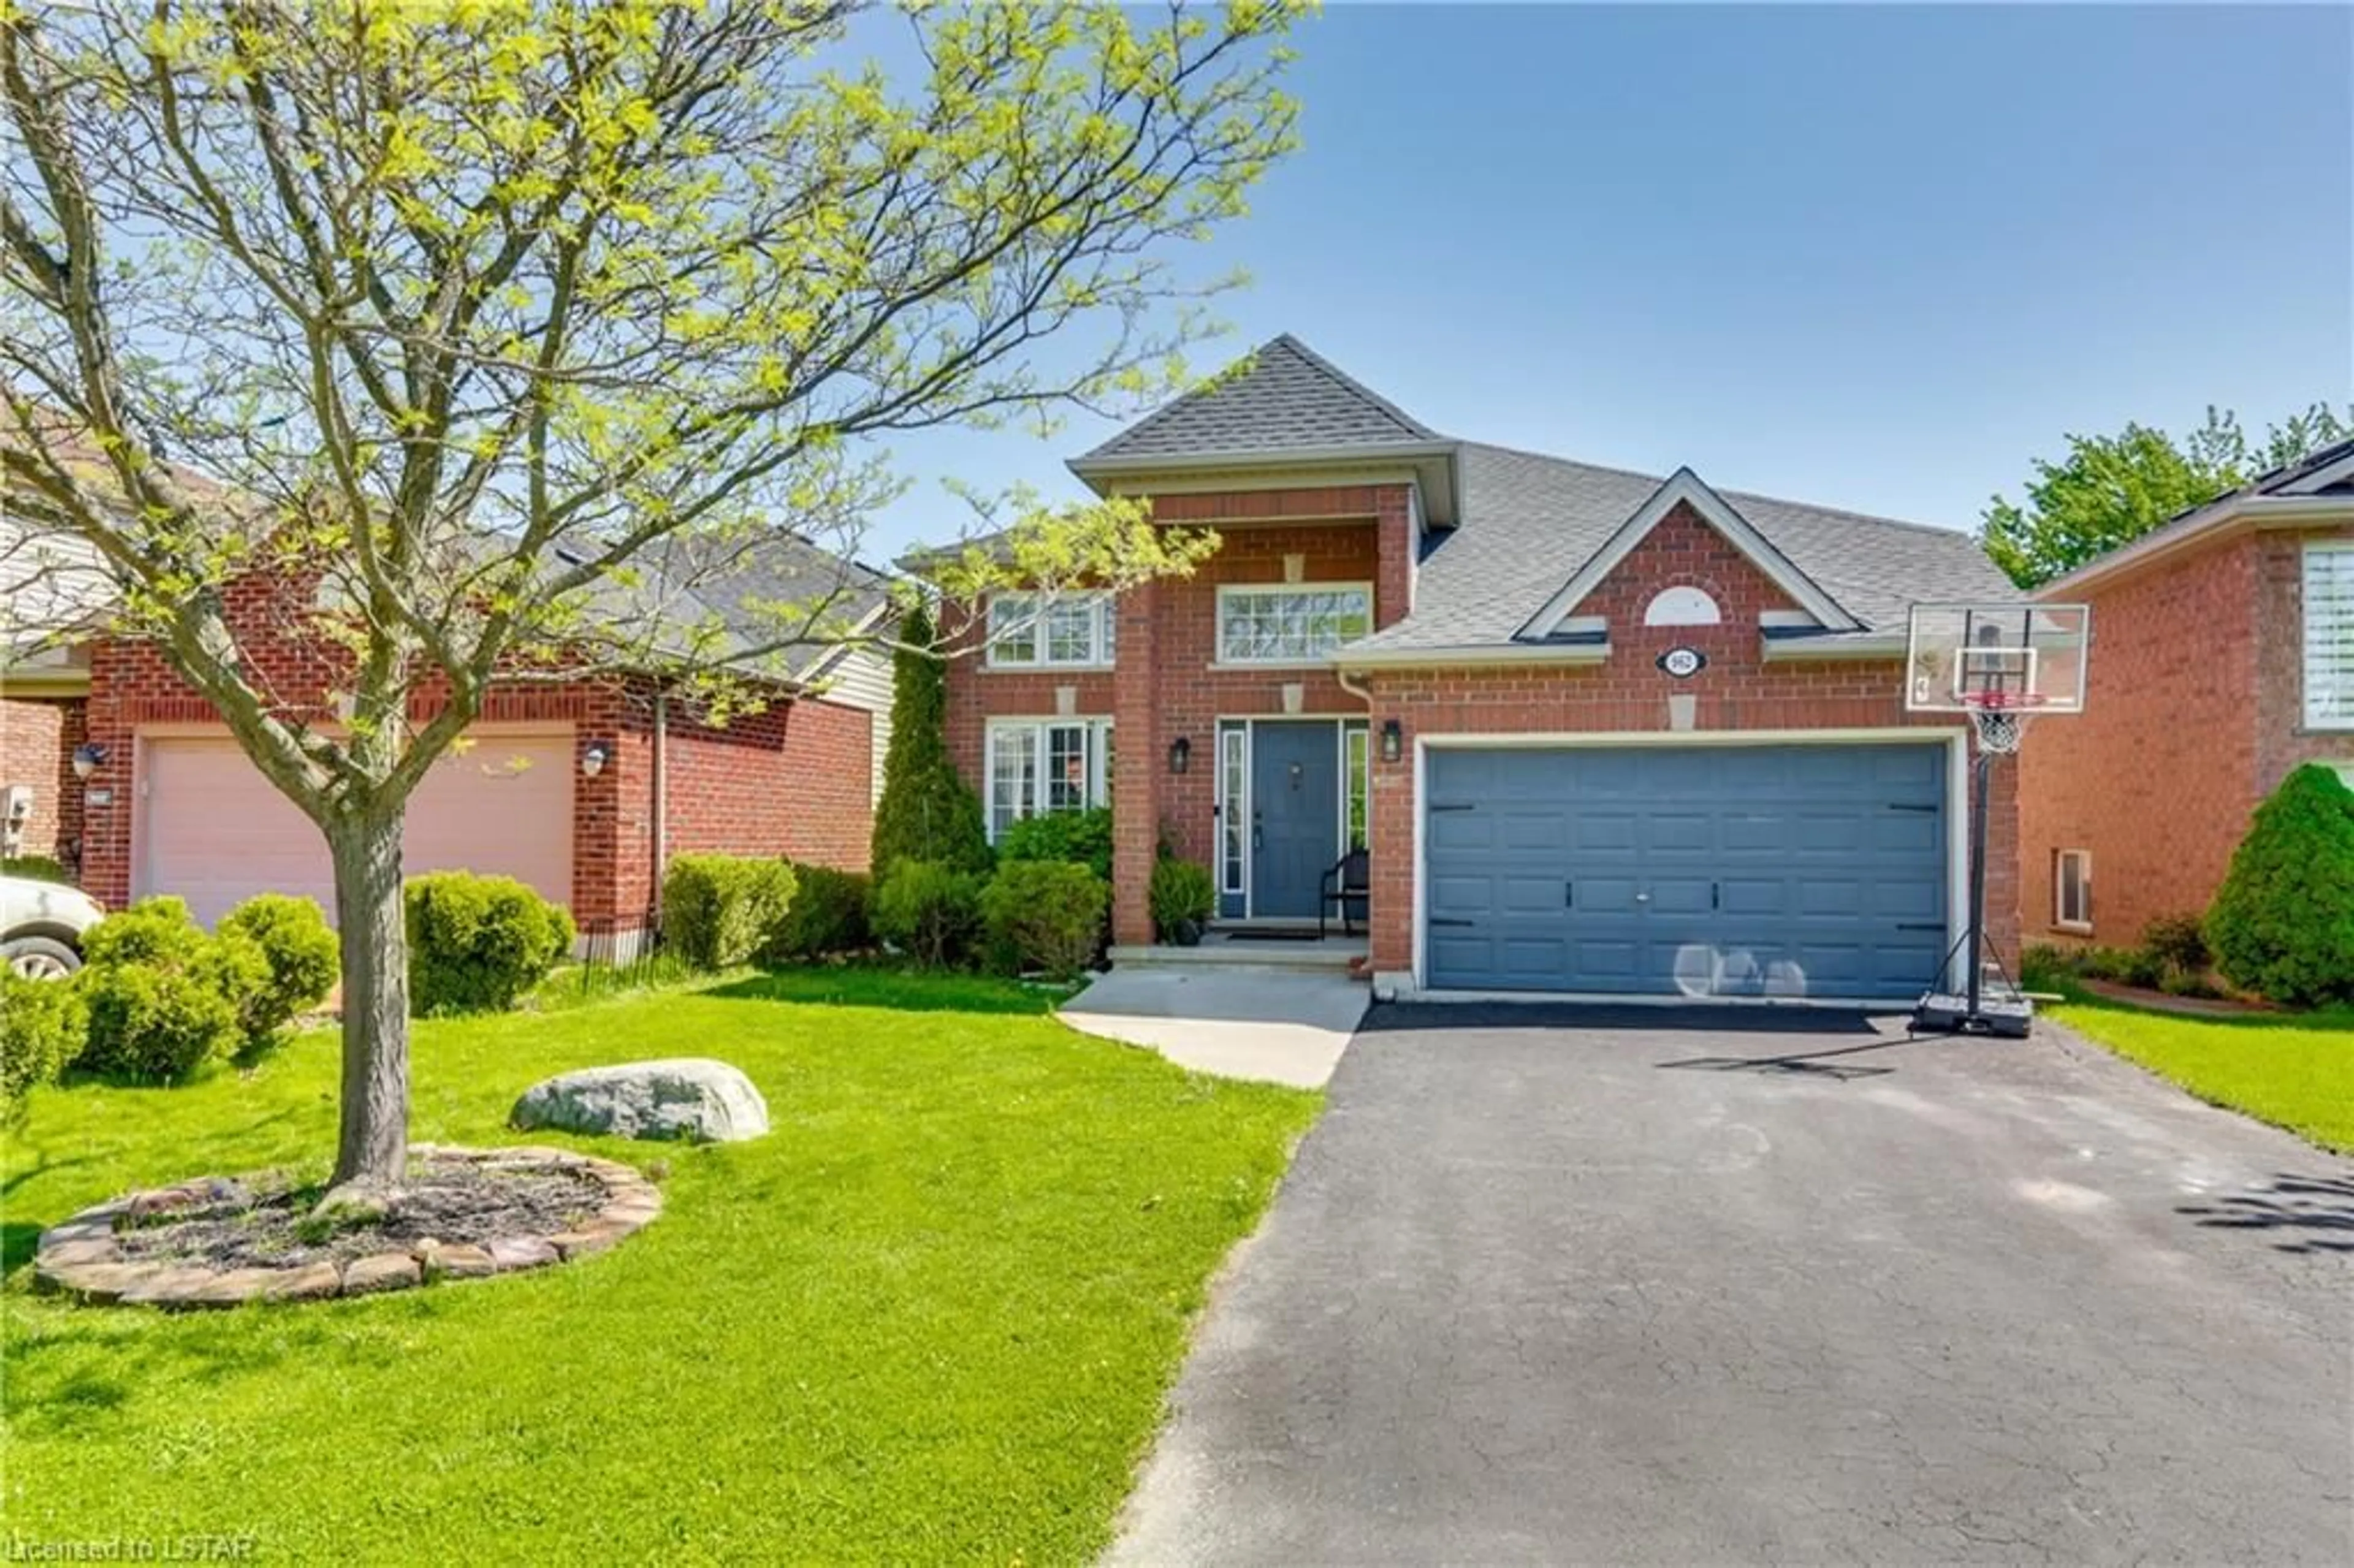 Home with brick exterior material for 962 Queensborough Crt, London Ontario N6G 5K1